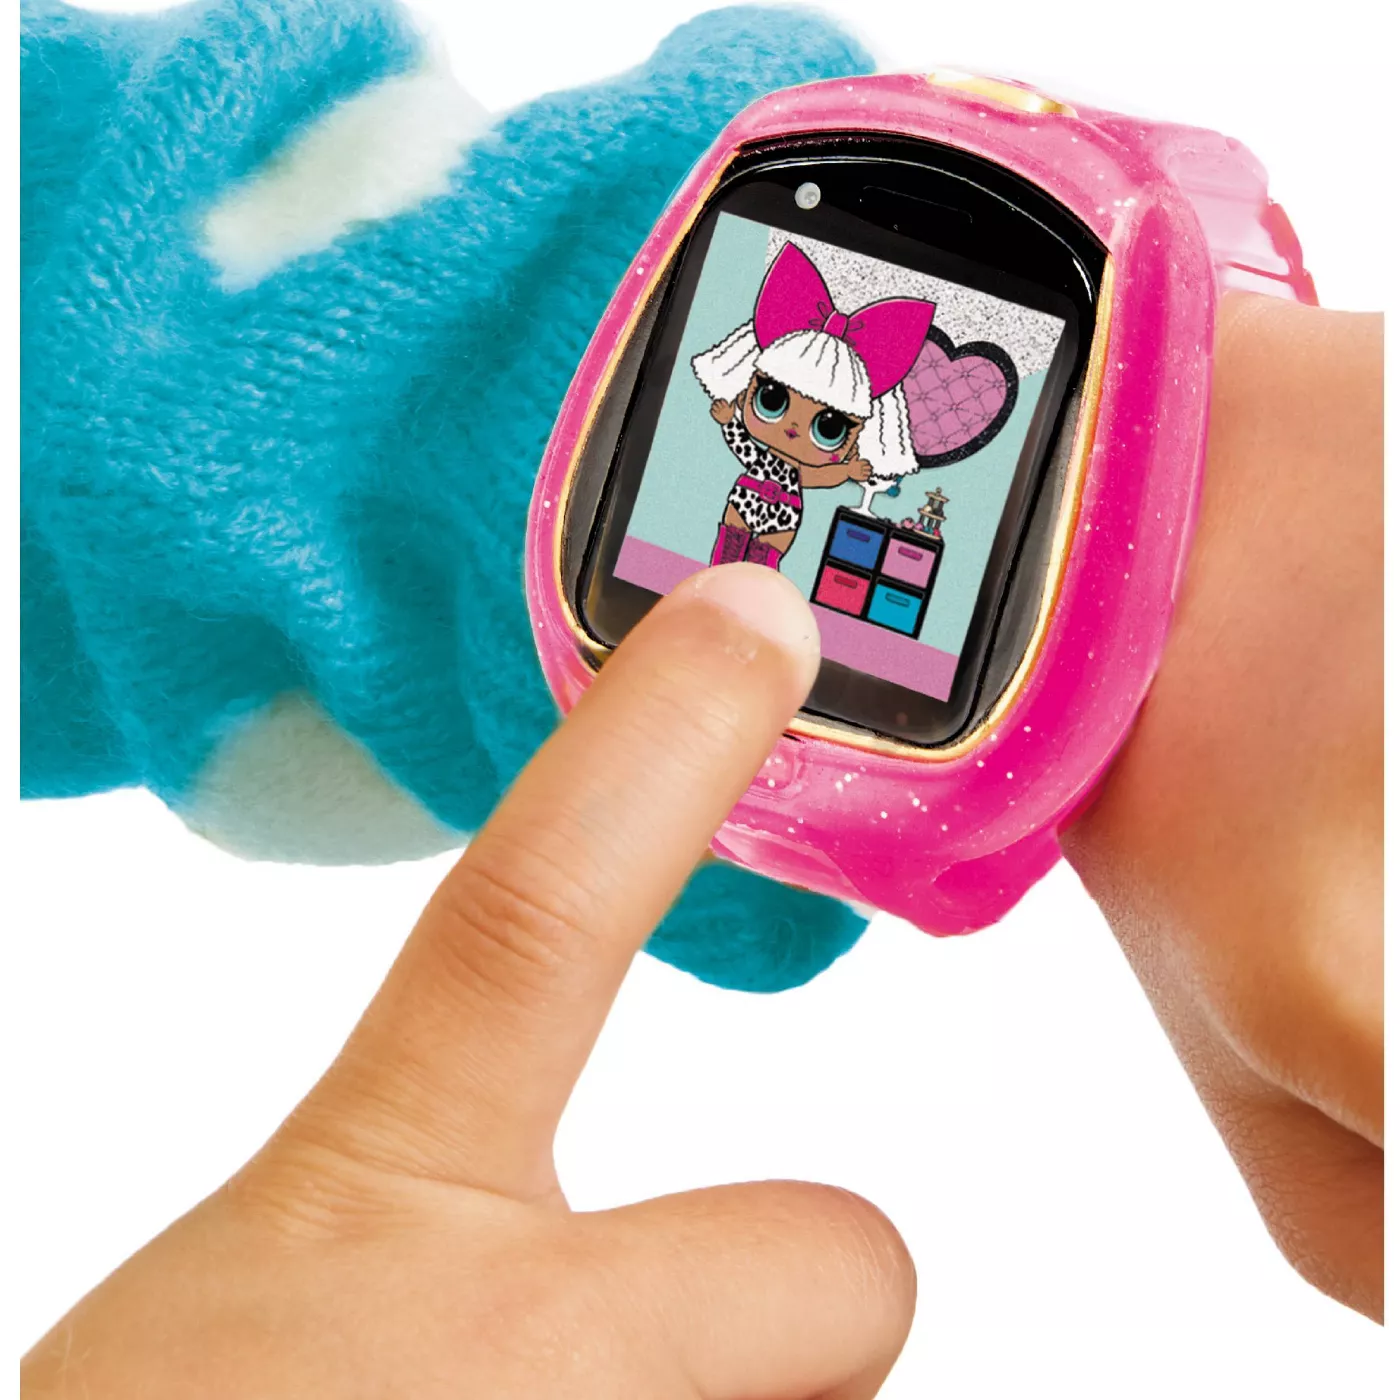 L.O.L. Surprise! Smartwatch! Pink -  Camera, Video, Games, Activities and More - £15.98 GBP